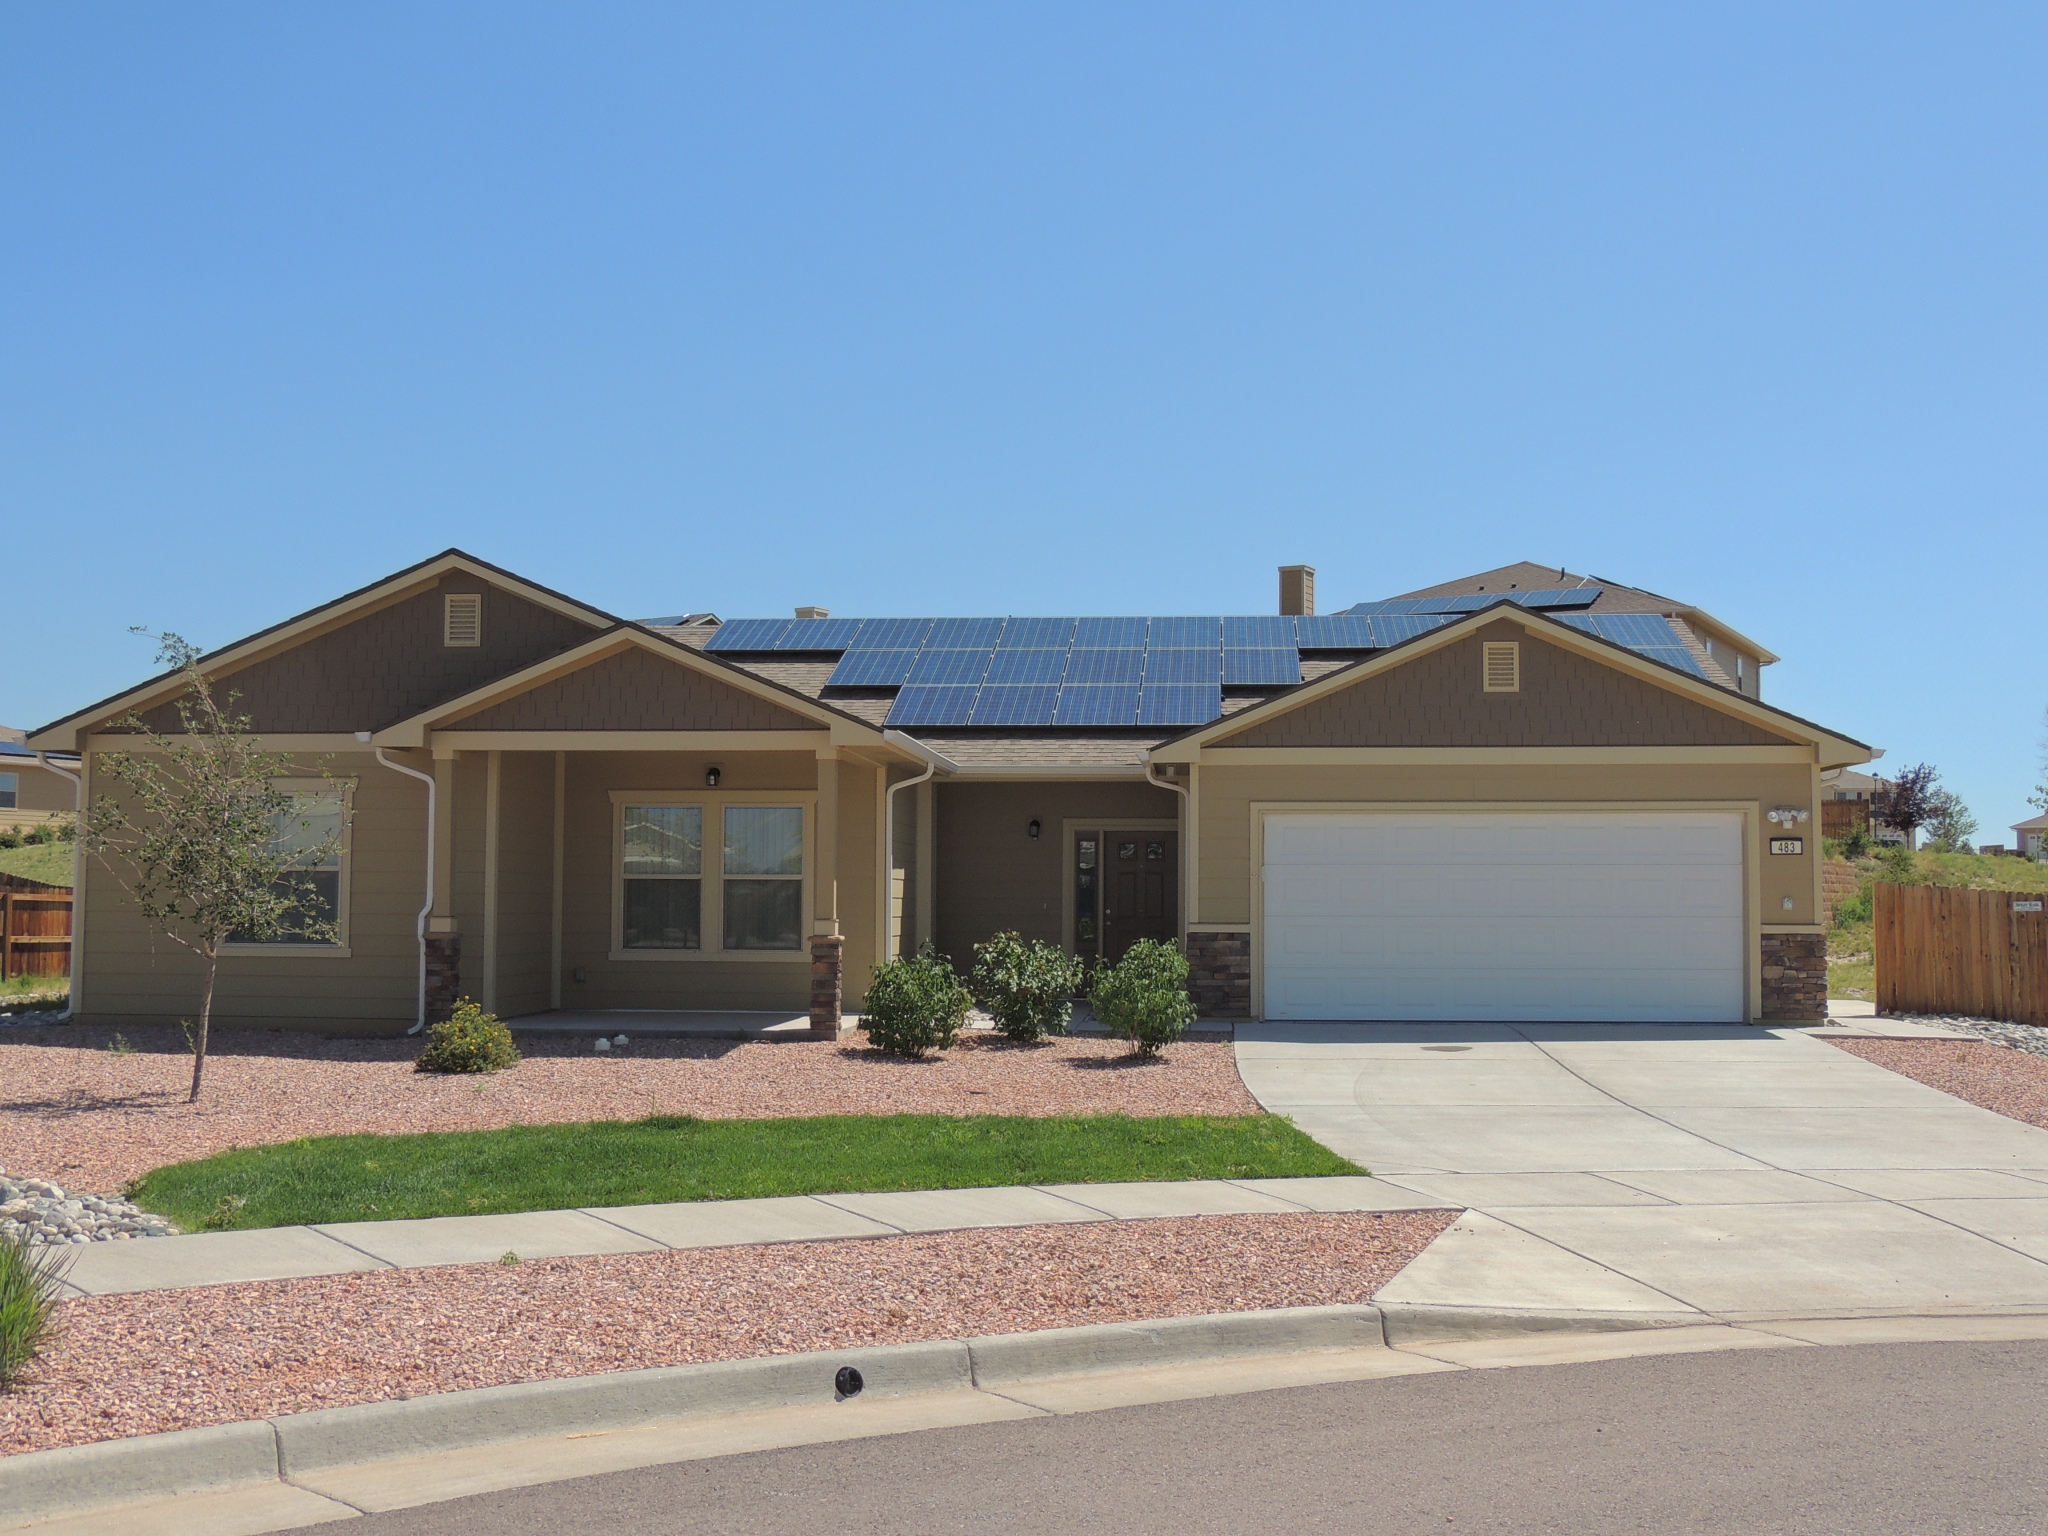 Houses for rent utilities included, Colorado Springs, CO